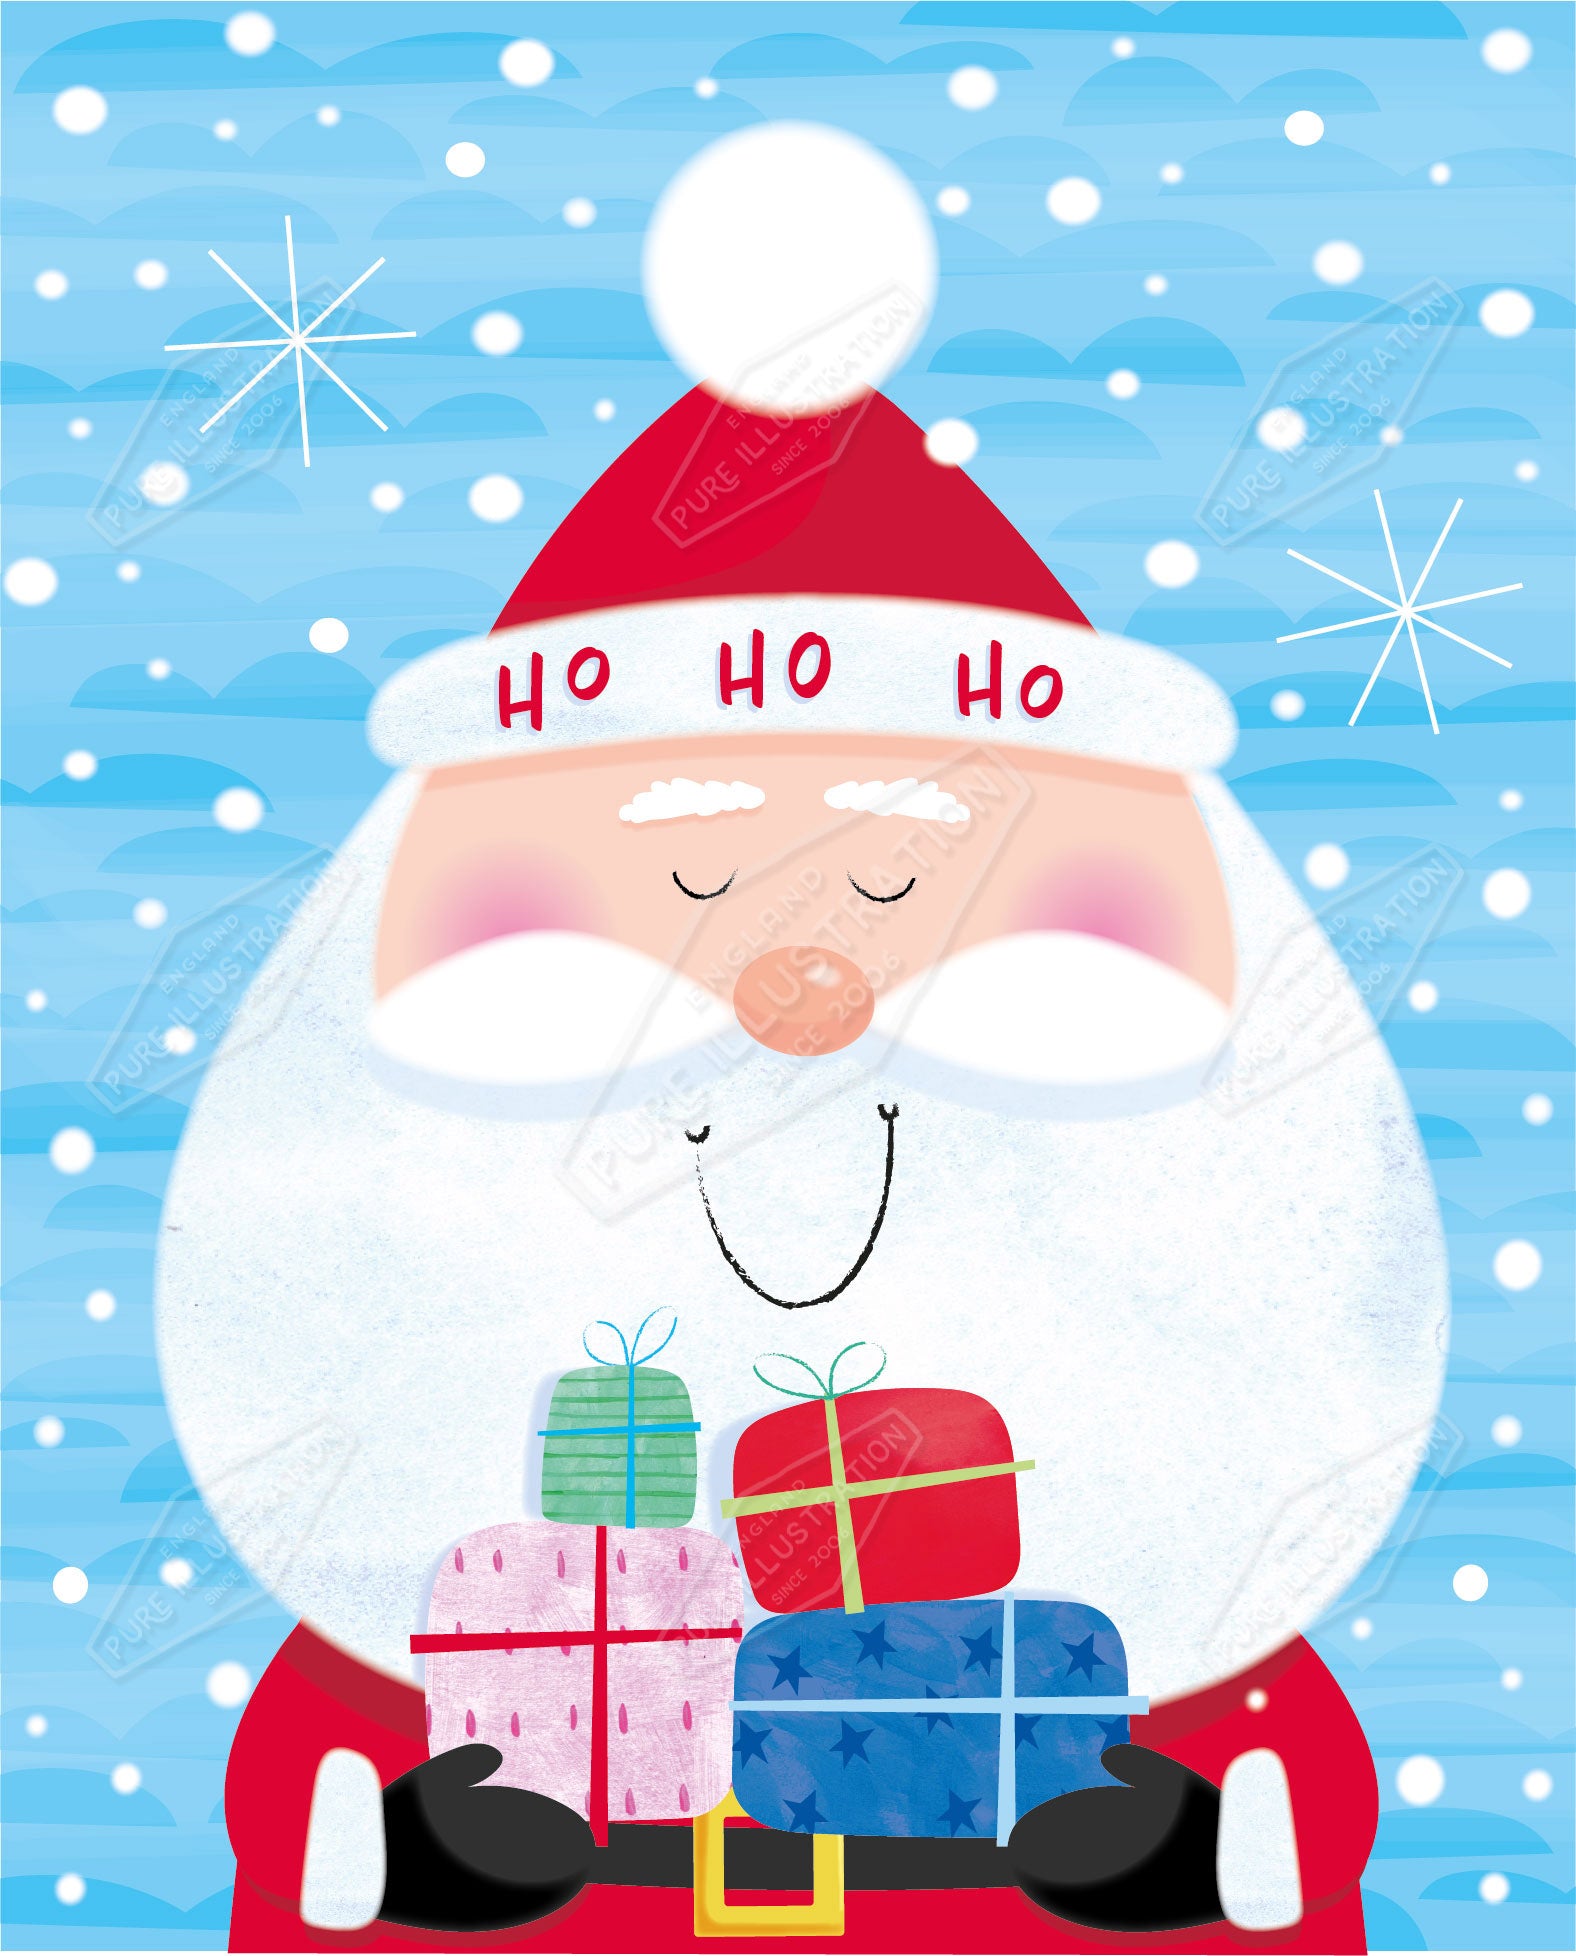 00035486SPI- Sarah Pitt is represented by Pure Art Licensing Agency - Christmas Greeting Card Design